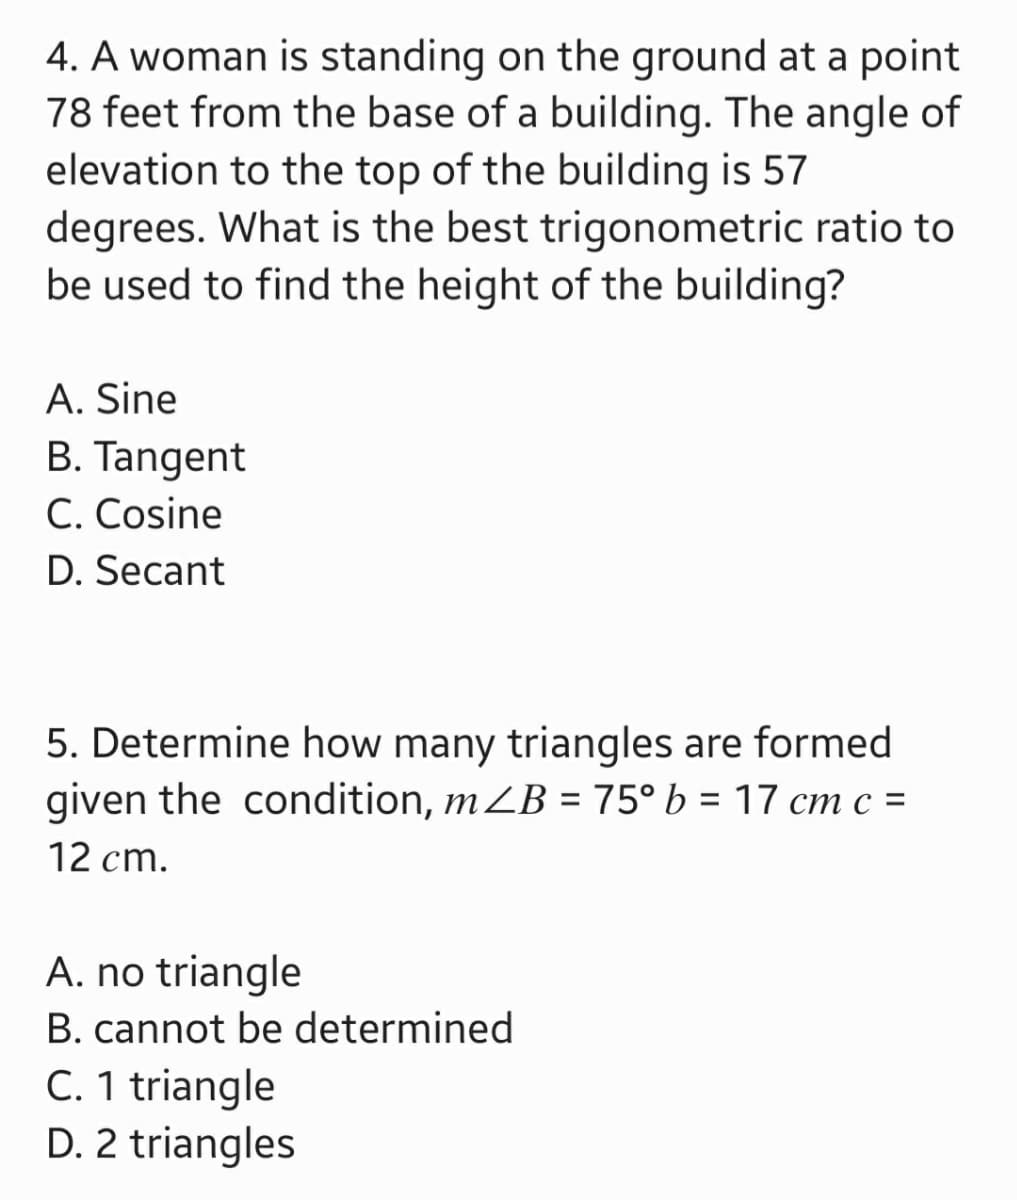 4. A woman is standing on the ground at a point
78 feet from the base of a building. The angle of
elevation to the top of the building is 57
degrees. What is the best trigonometric ratio to
be used to find the height of the building?
A. Sine
B. Tangent
C. Cosine
D. Secant
5. Determine how many triangles are formed
given the condition, m ZB = 75° b = 17 cm c =
12 cm.
A. no triangle
B. cannot be determined
C. 1 triangle
D. 2 triangles